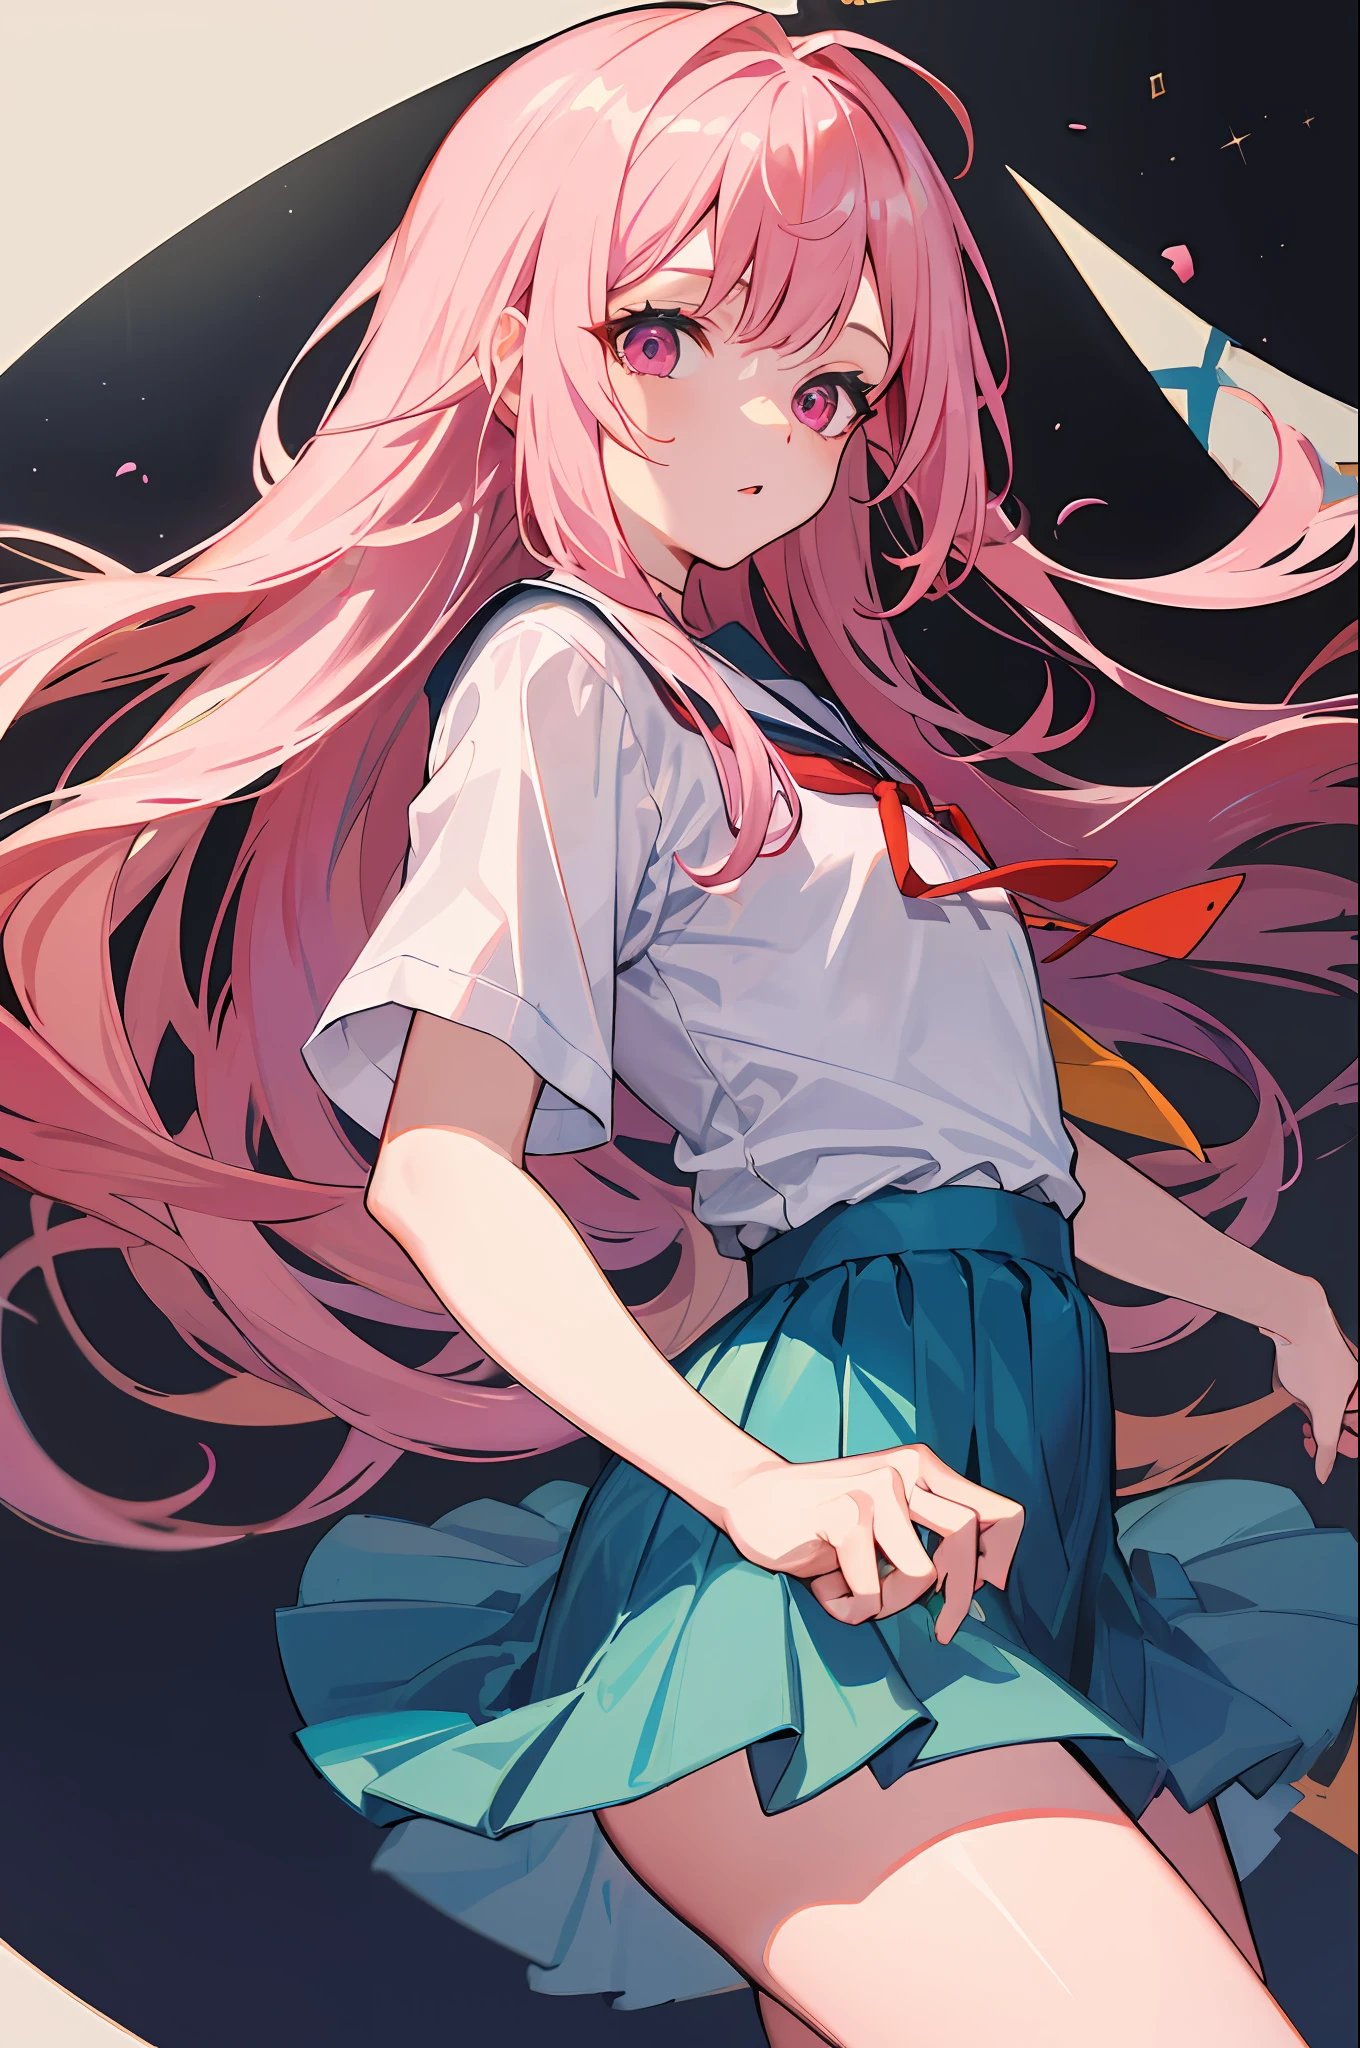 （absurderes， A high resolution， ultra - detailed）， 1 girl， solo， （Very long hair， Pink hair）， colorful， The finest details， 16 years old， small， Superskirt， Uniforms， short- sleeved， deep dark background， Santorini, Greece